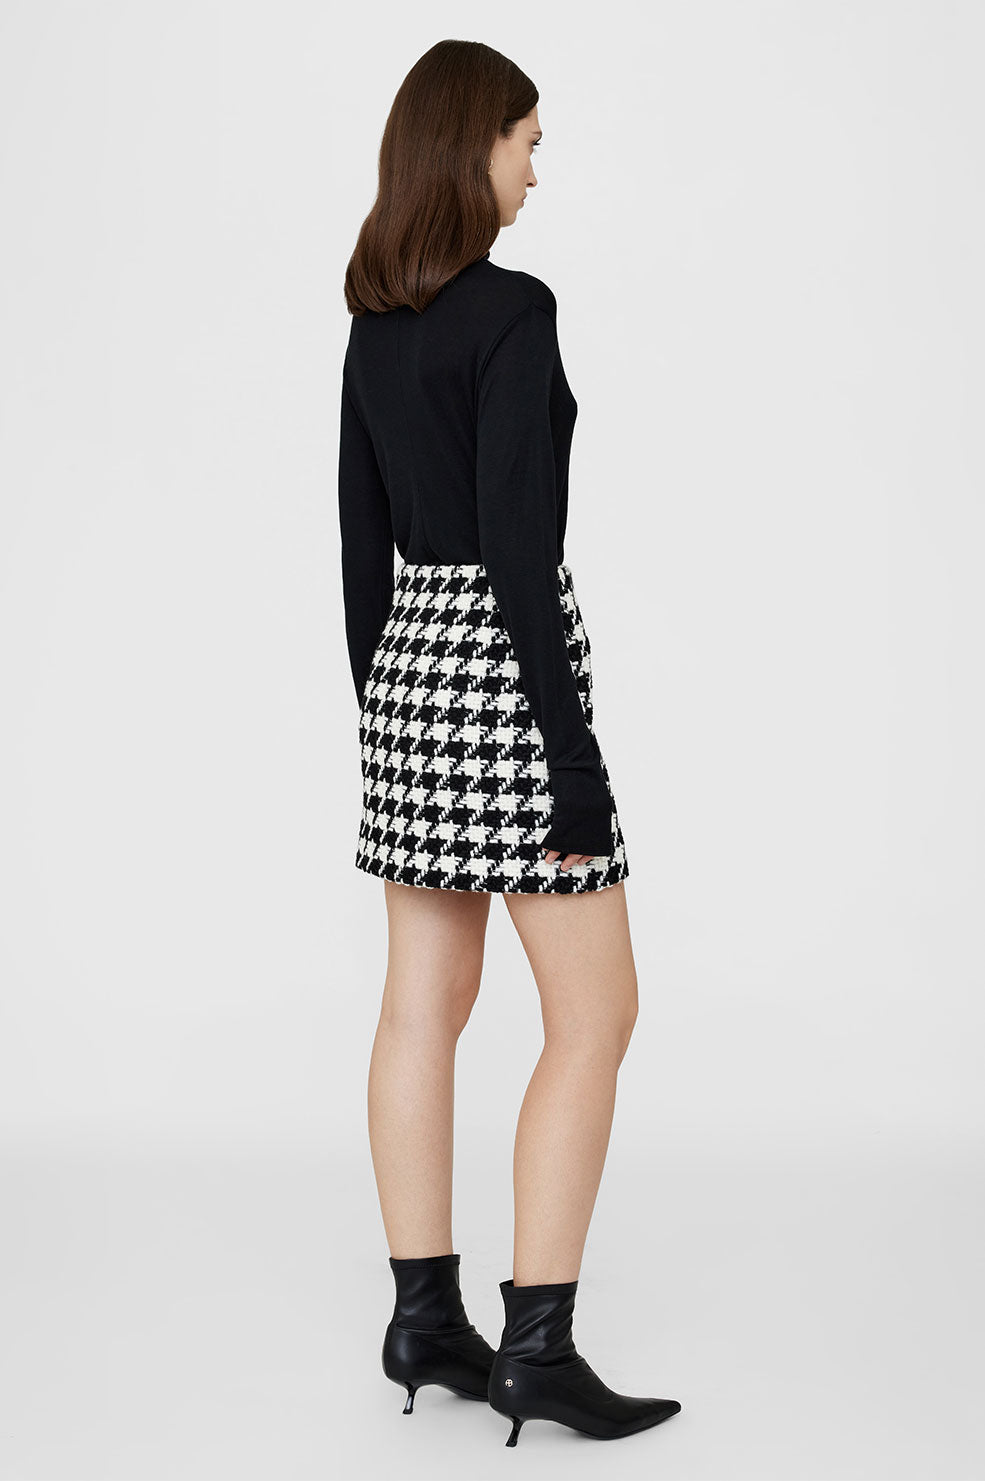 Ada Skirt - Black And White Houndstooth